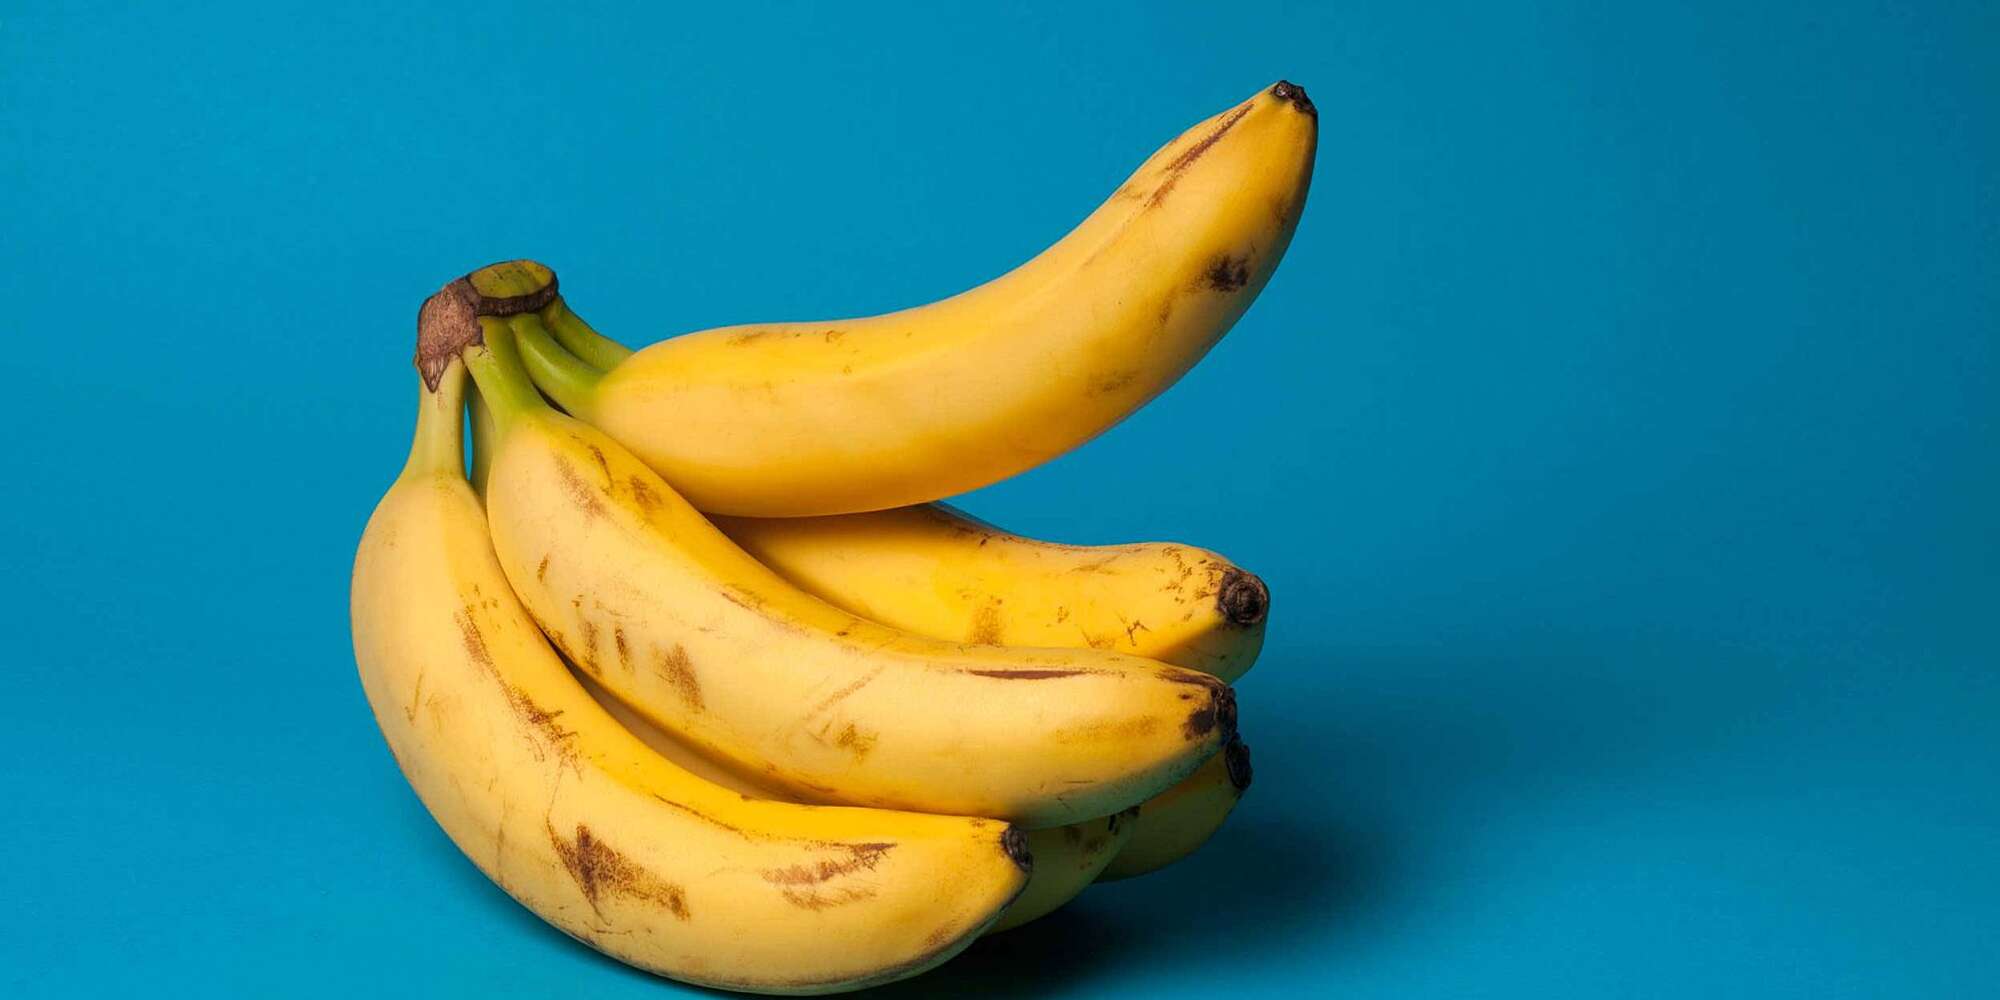 2. Don't keep overripe bananas with fresh ones